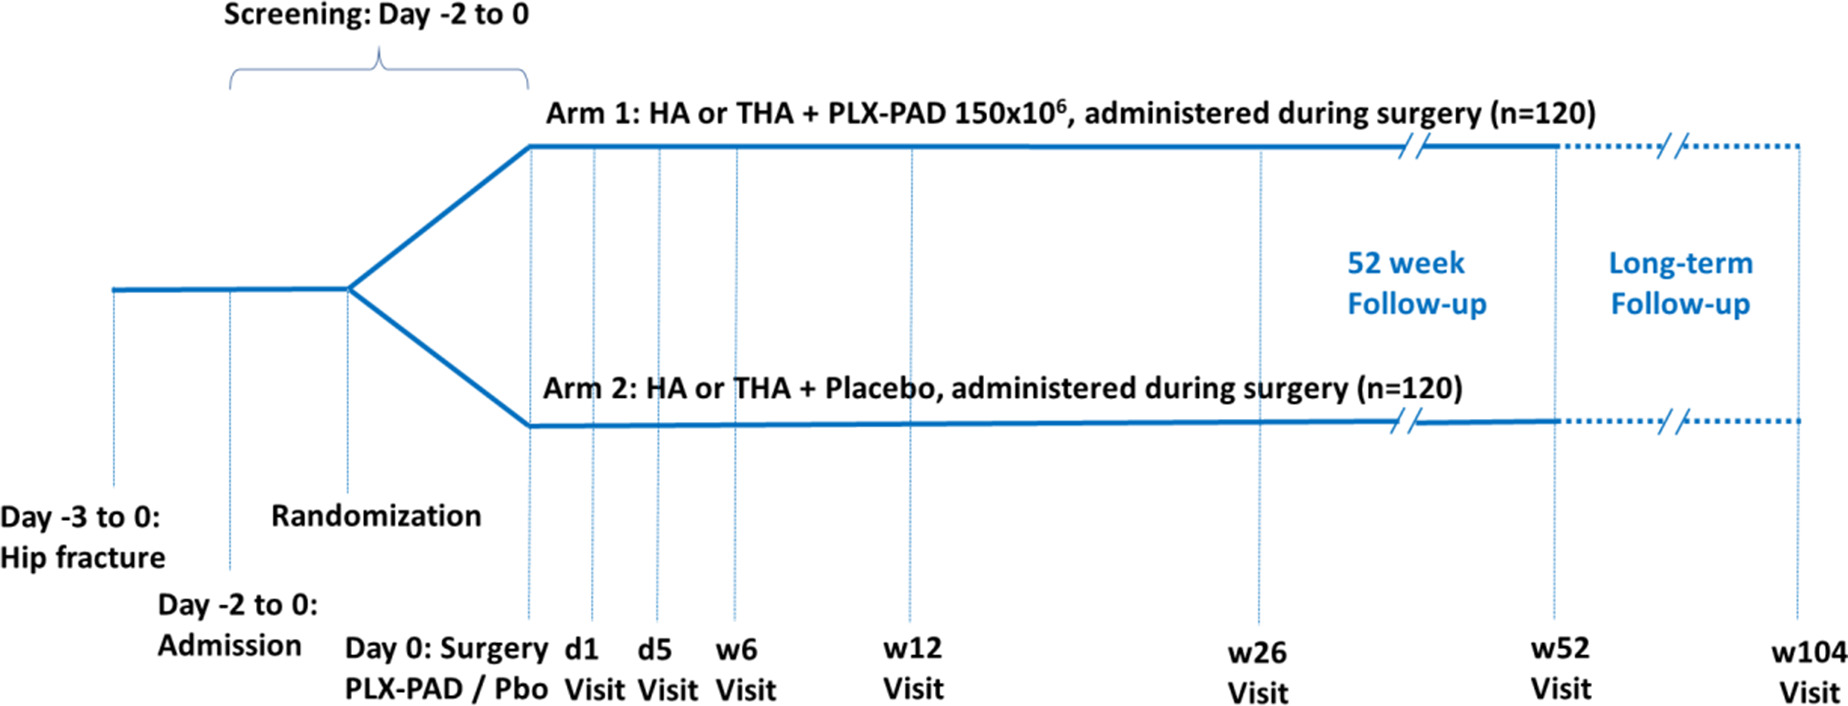 Fig. 1 
            Schematic study design of the HIPGEN trial. Main study period comprises four periods (screening and pre-surgery; surgery and treatment with placenta-derived adherent stromal cells (PLX-PAD) or placebo (Pbo); hospital follow-up until discharge; follow-up period of 104 weeks). d, day; HA, hemiarthroplasty; placebo; THA, total hip arthroplasty; w, week.
          